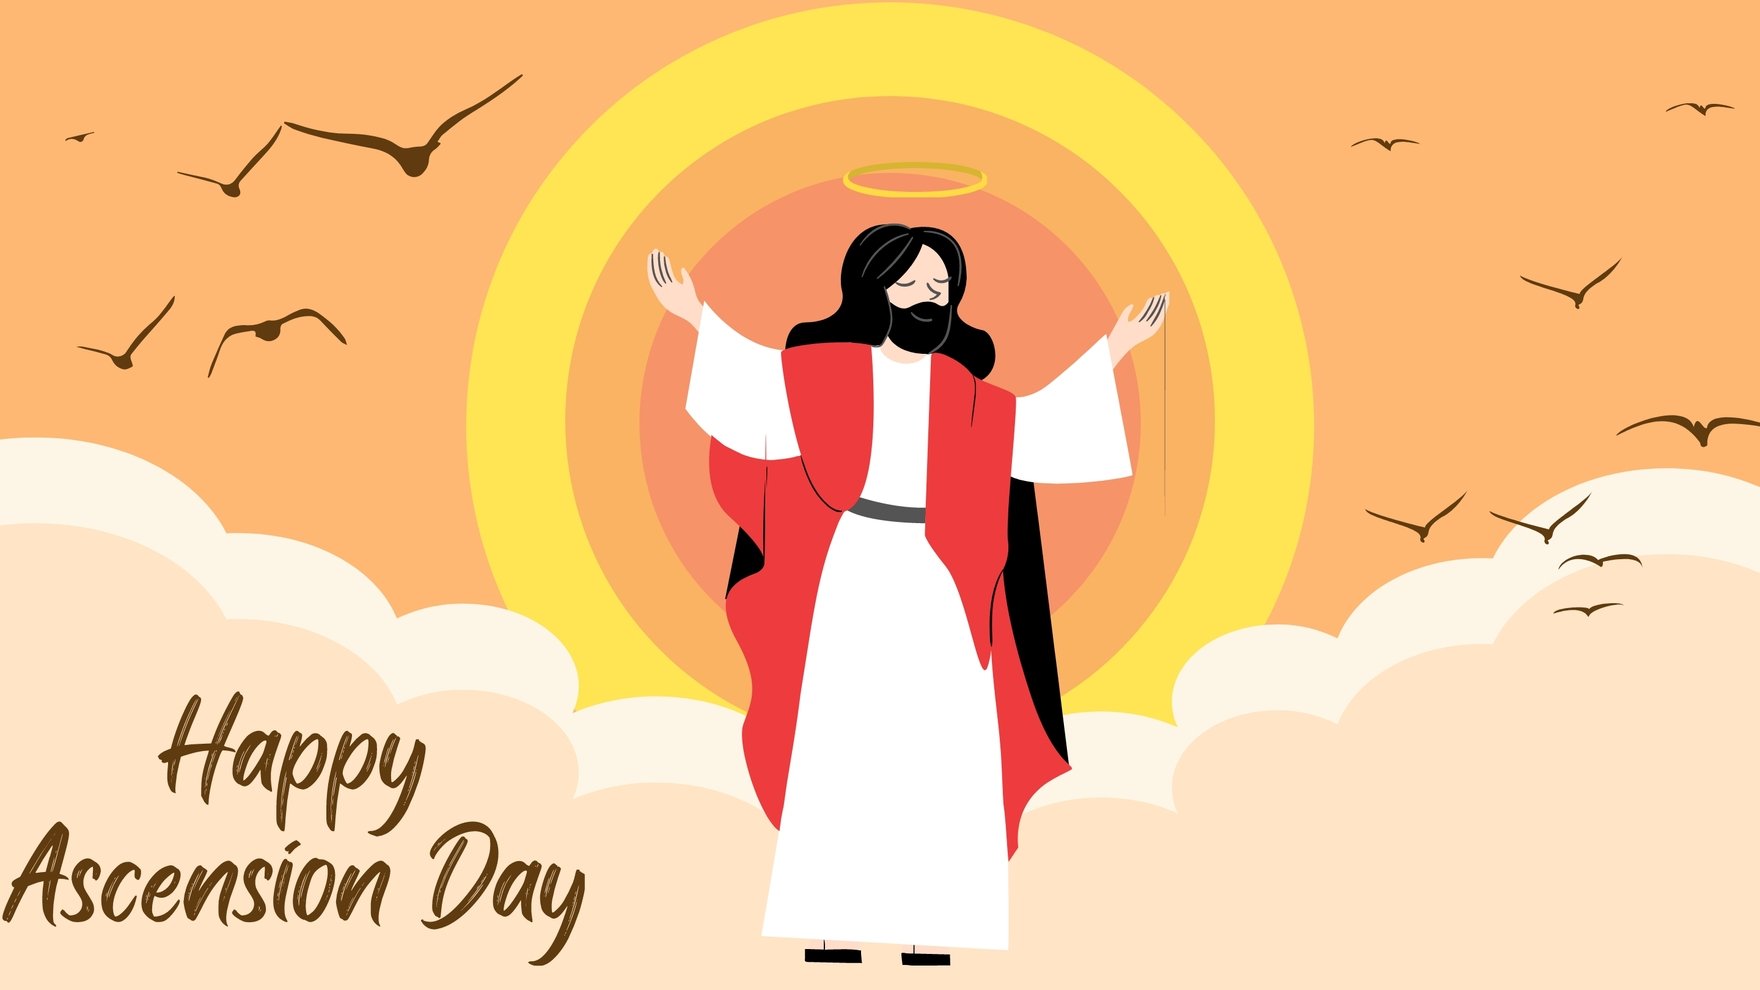 Free Ascension Day Vector Background